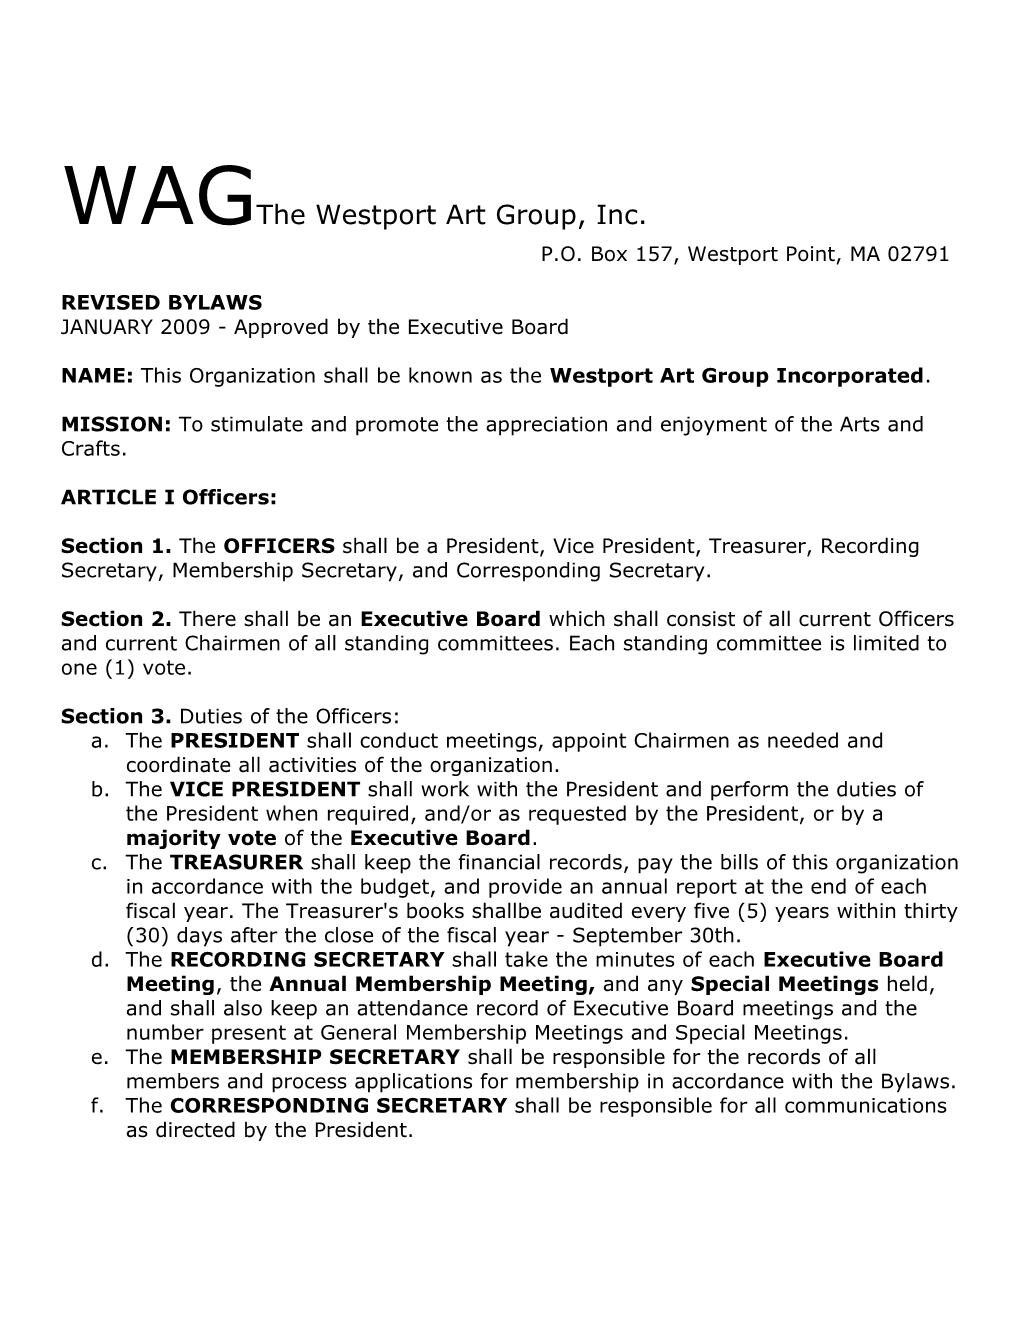 WESTPORT ART GROUP , INC - REVISED BY-LAWS JANUARY 2009Page 1